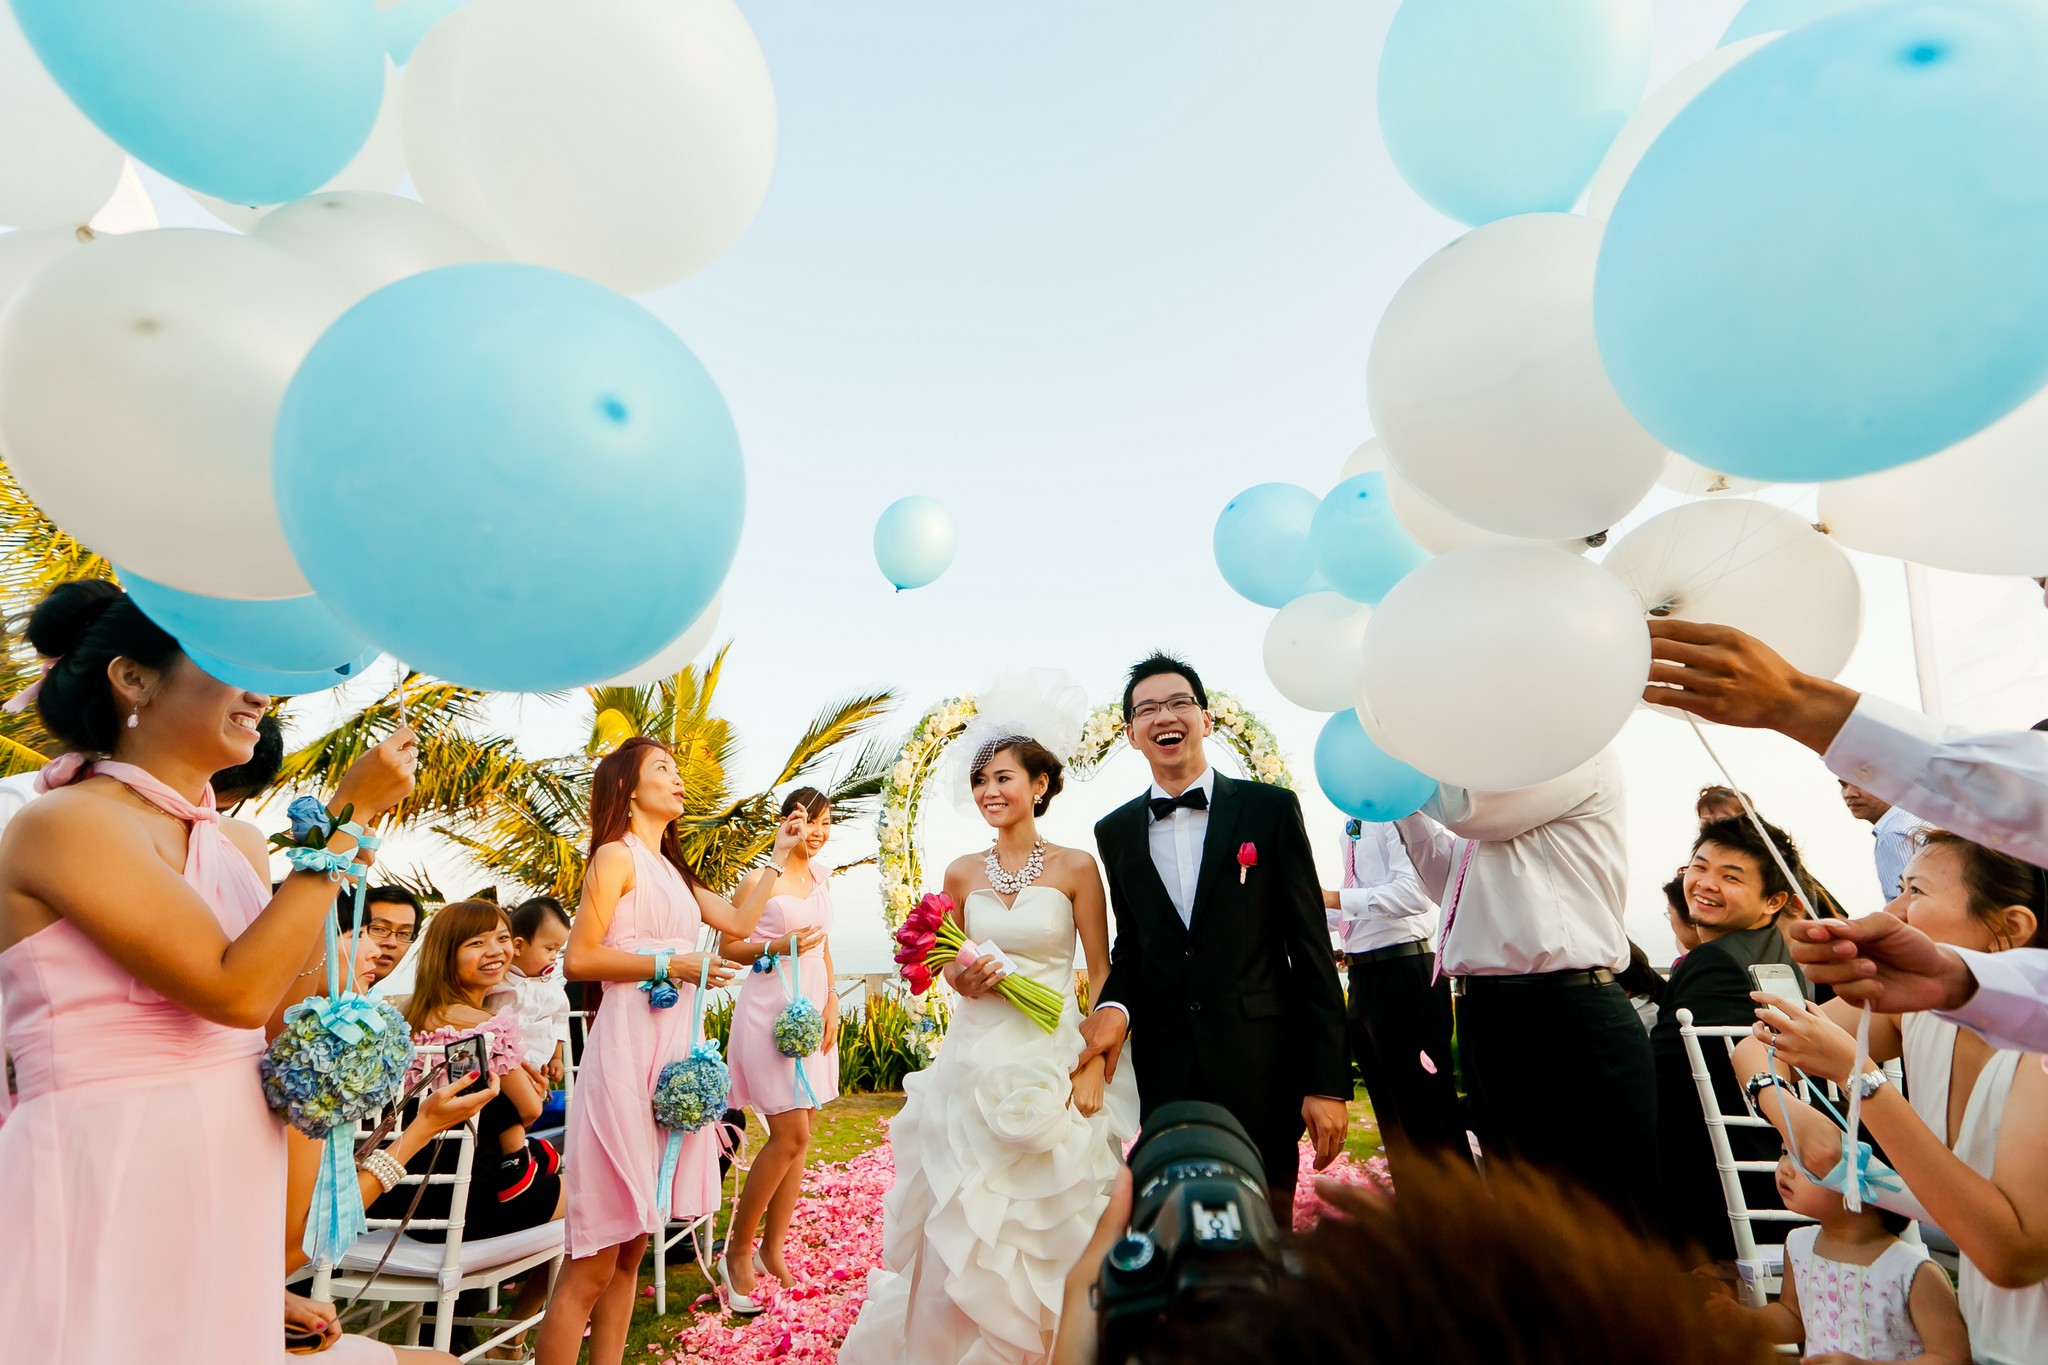 Bride and groom walk down aisle with blue and white balloons at bridal wedding photography in Singapore.